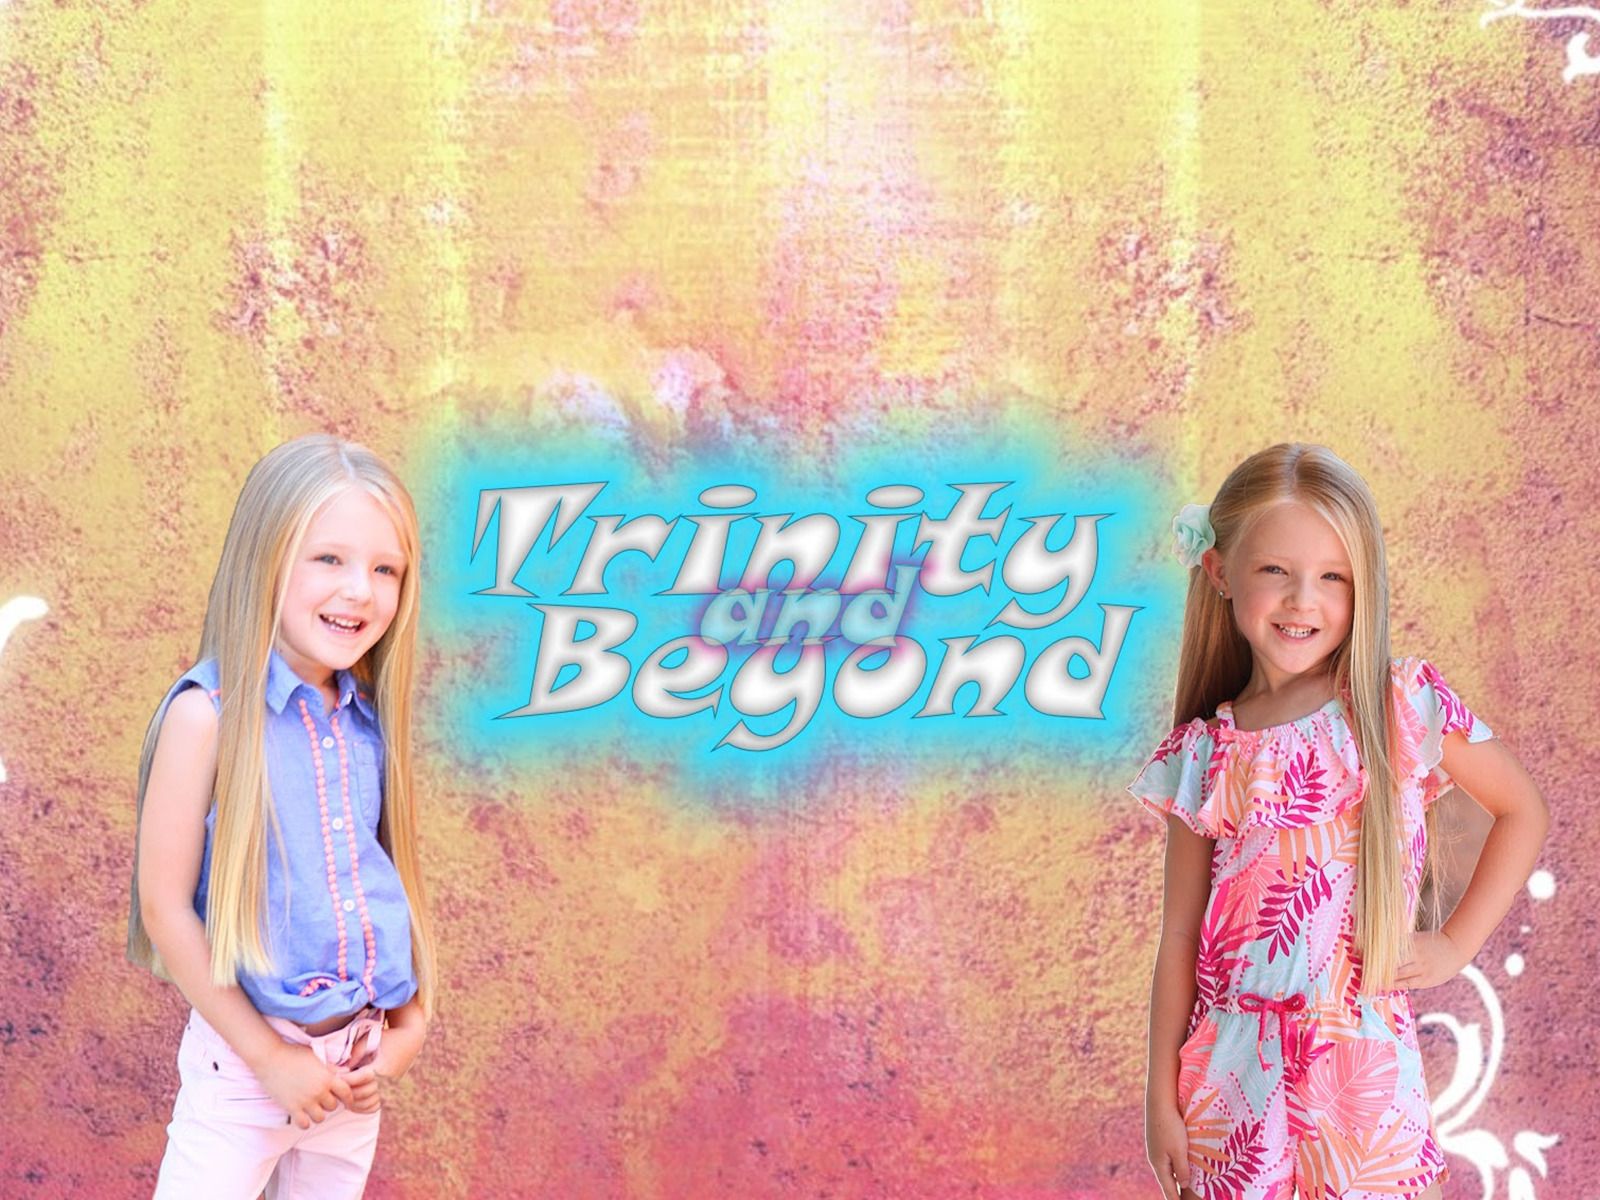 Prime Video: Trinity and Beyond